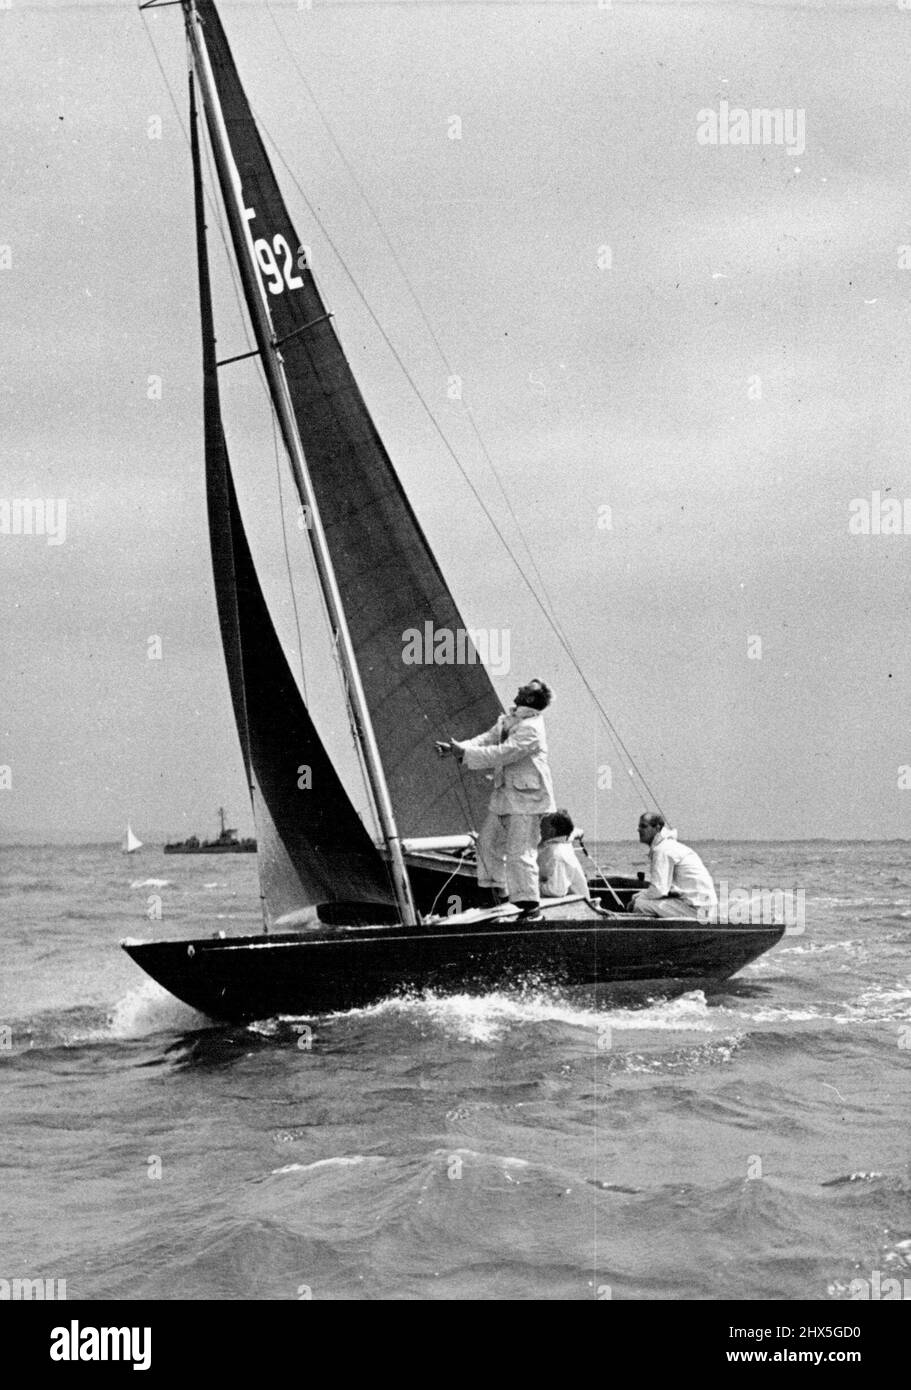 Duke of Edinburgh at the tiller of the Bluebottle. The Duke of Edinburgh retired from the Dragon-class race at Cowes Regatta yesterday after ten minutes. Bluebottle, the yacht be owns jointly with the Queen, was damaged in a collision, it is believed, with a motor launch. Her fore - stay was carried away and she returned to harbour with her main sail half-lowered. May 8, 1953. Stock Photo